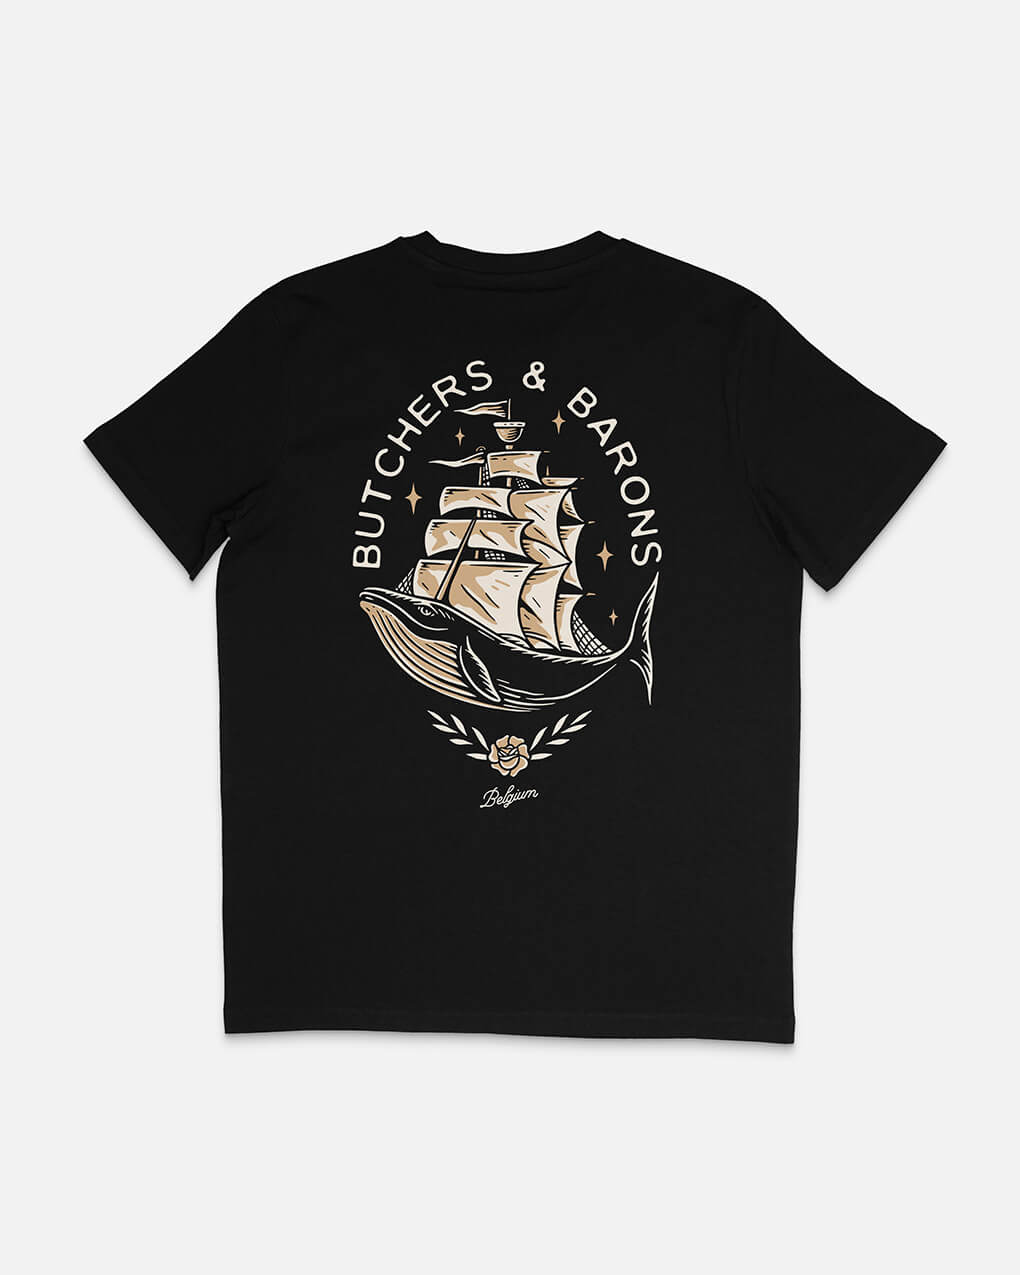 waters of chaos t-shirt by Butchers & Barons